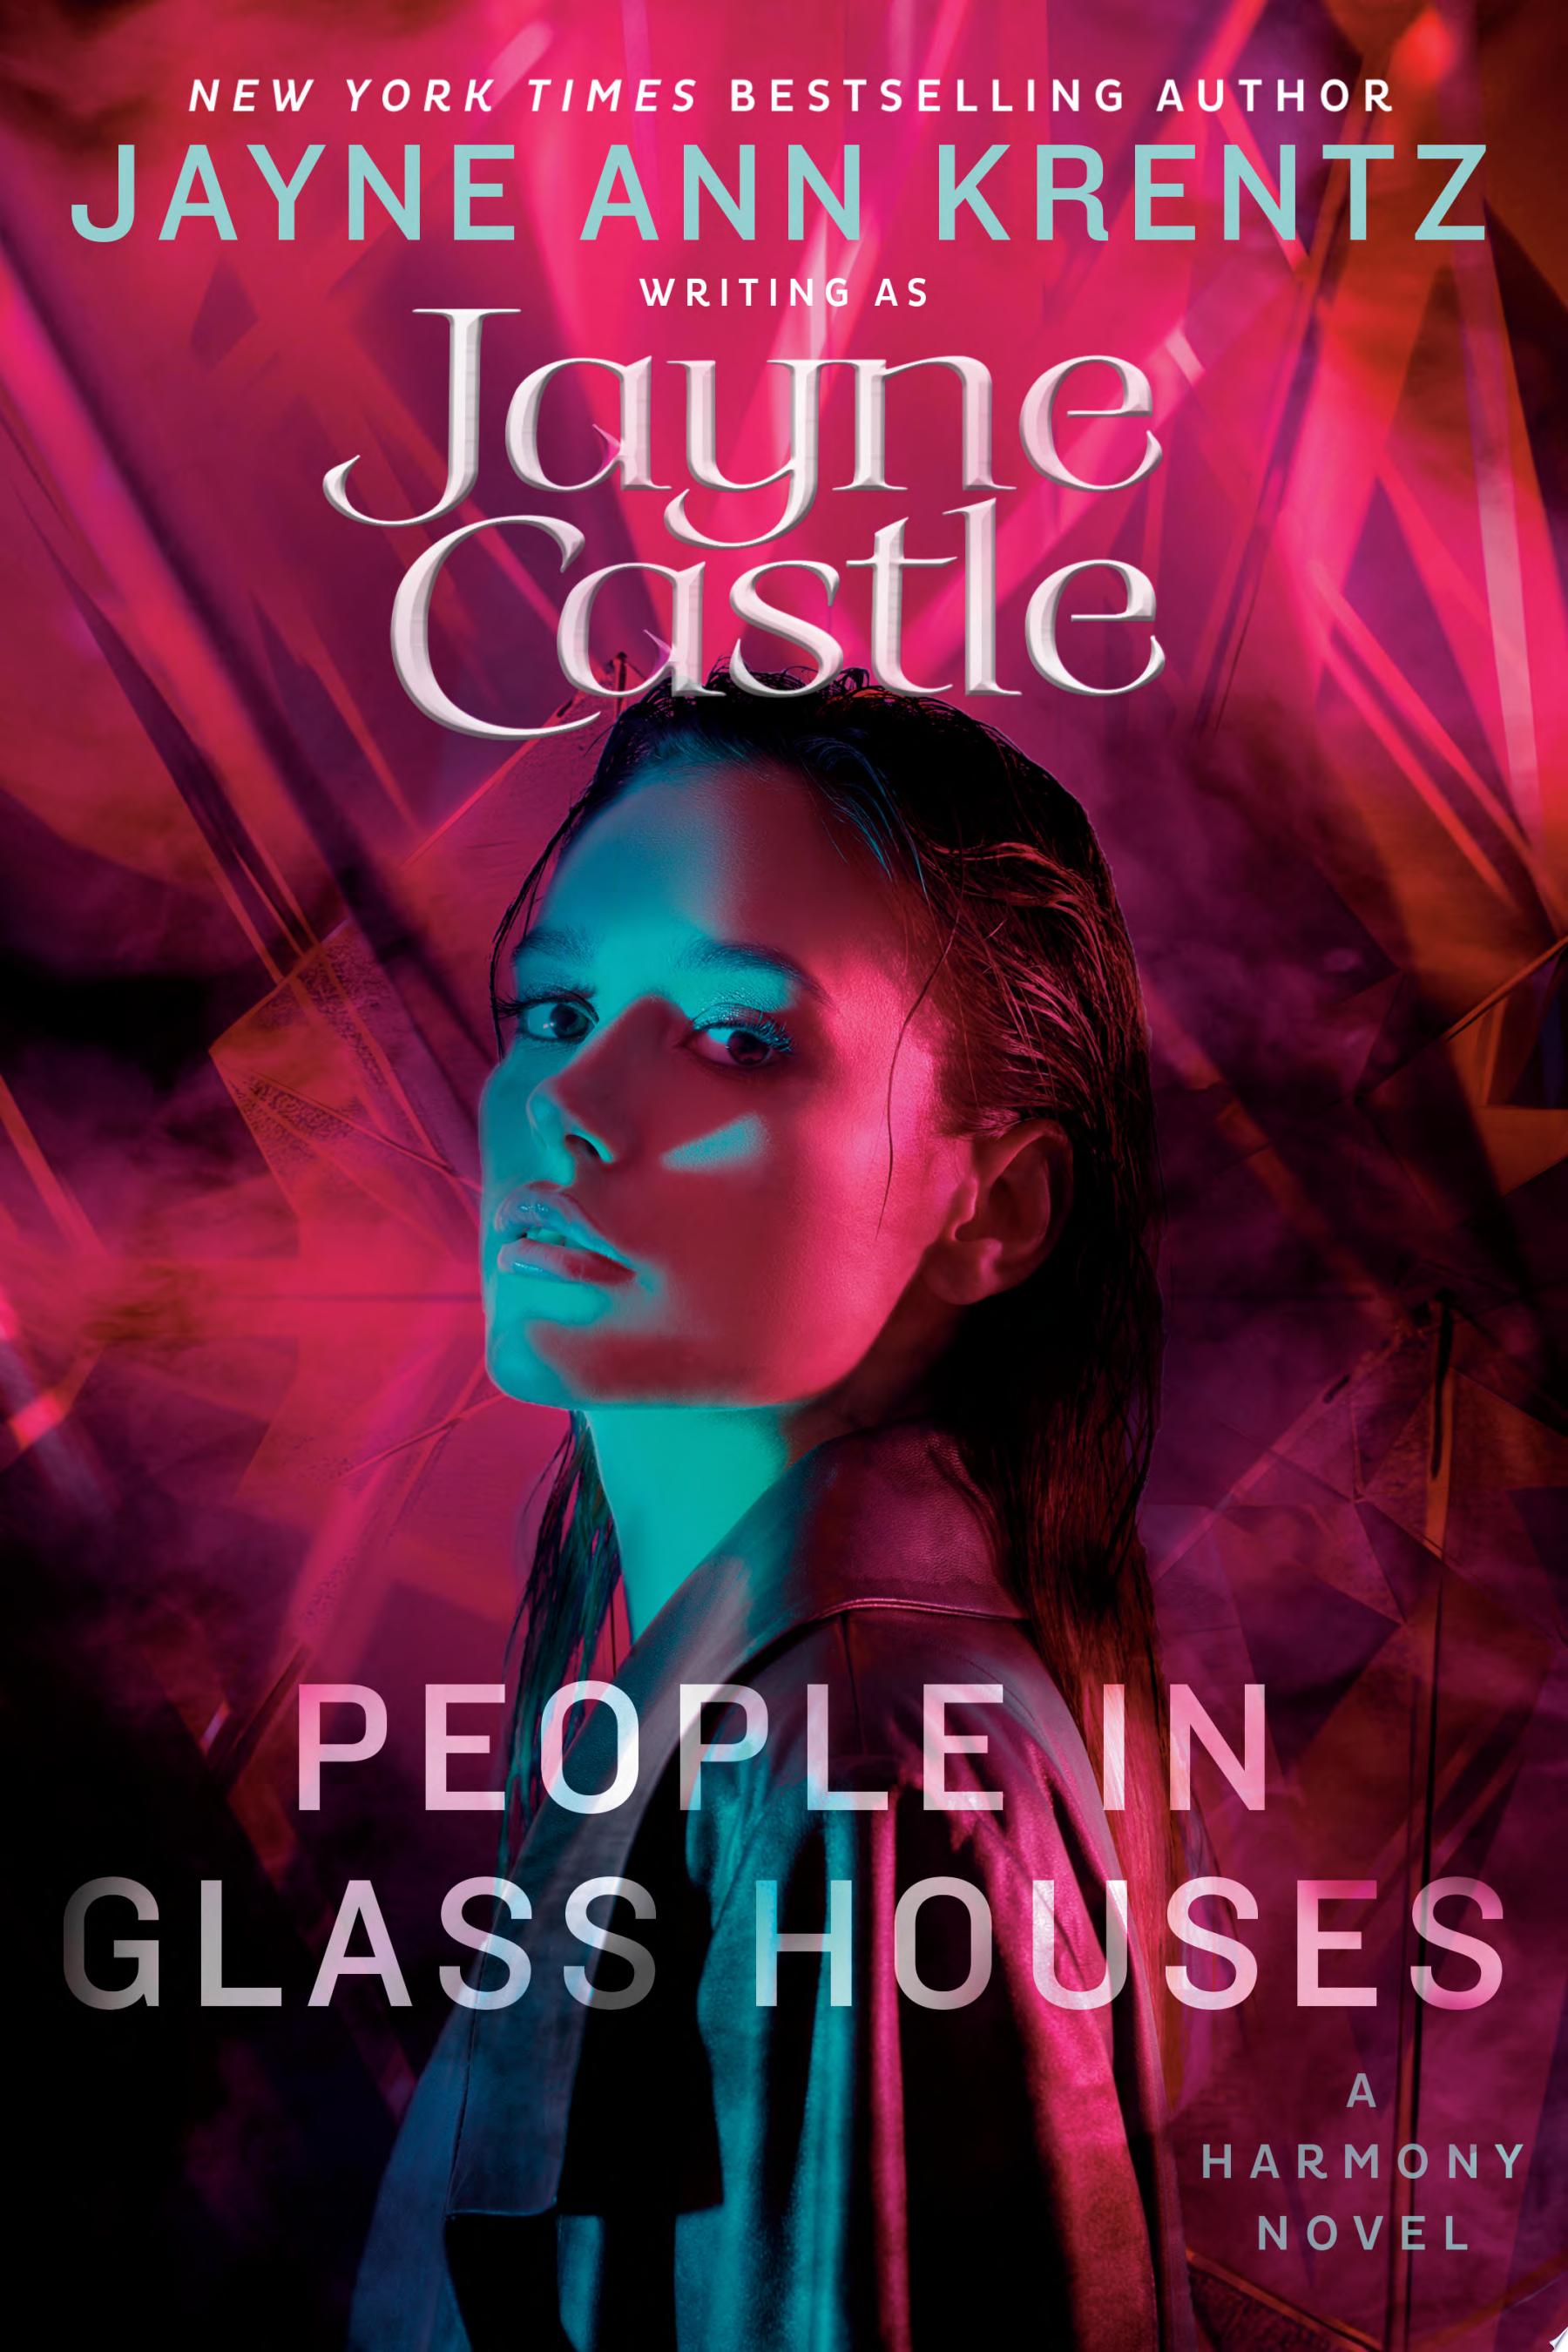 Image for "People in Glass Houses"